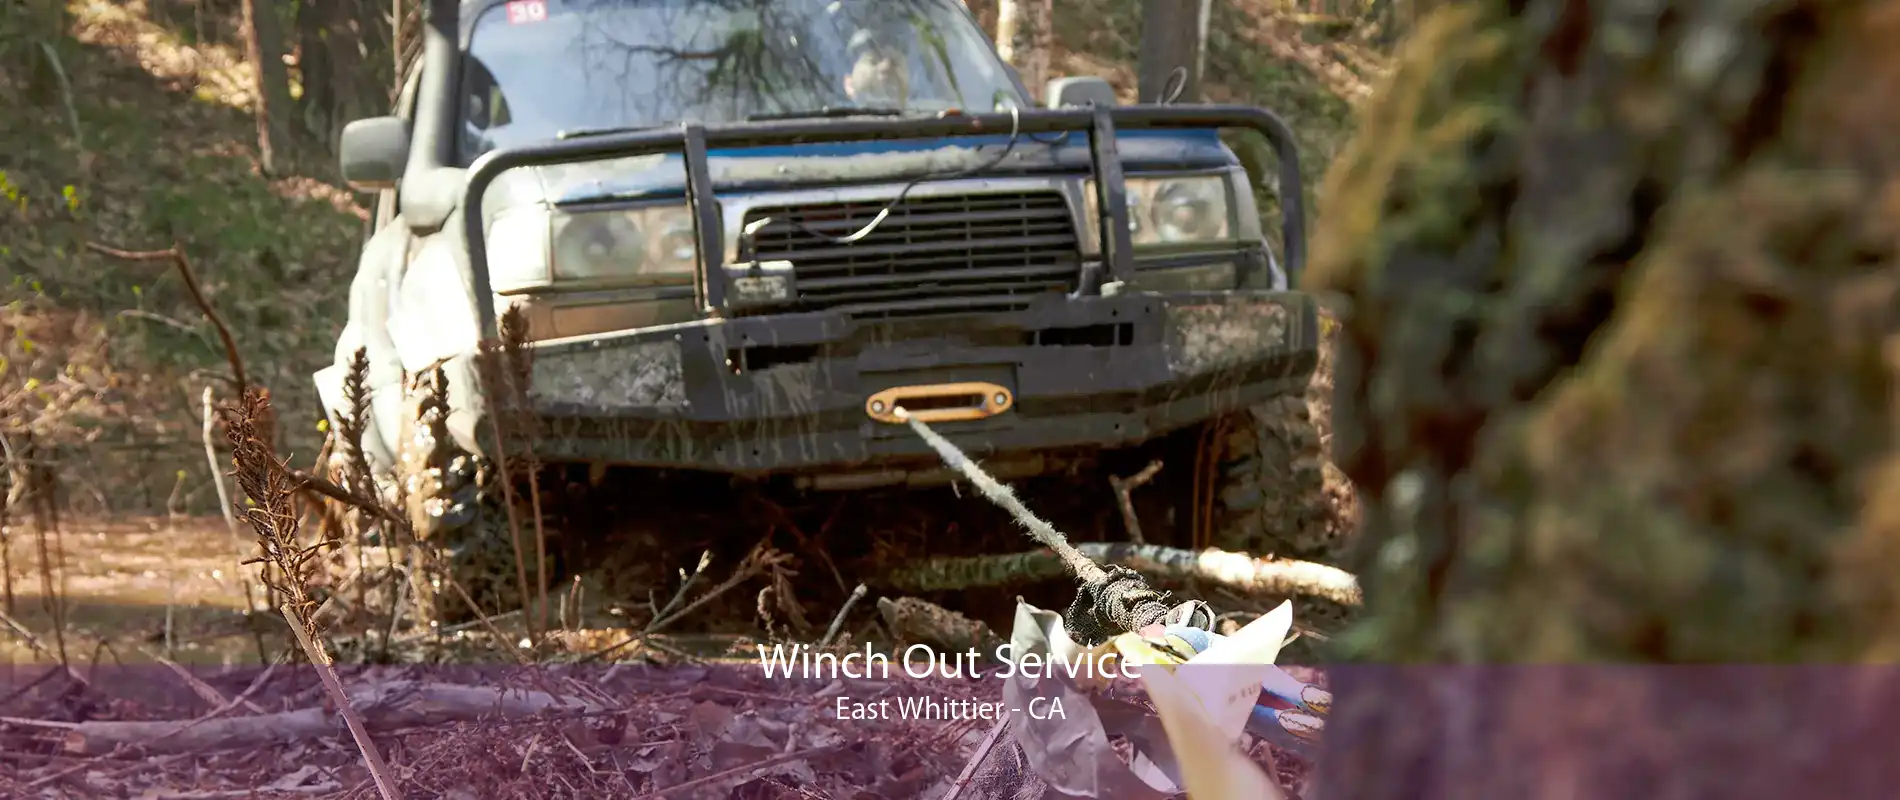 Winch Out Service East Whittier - CA